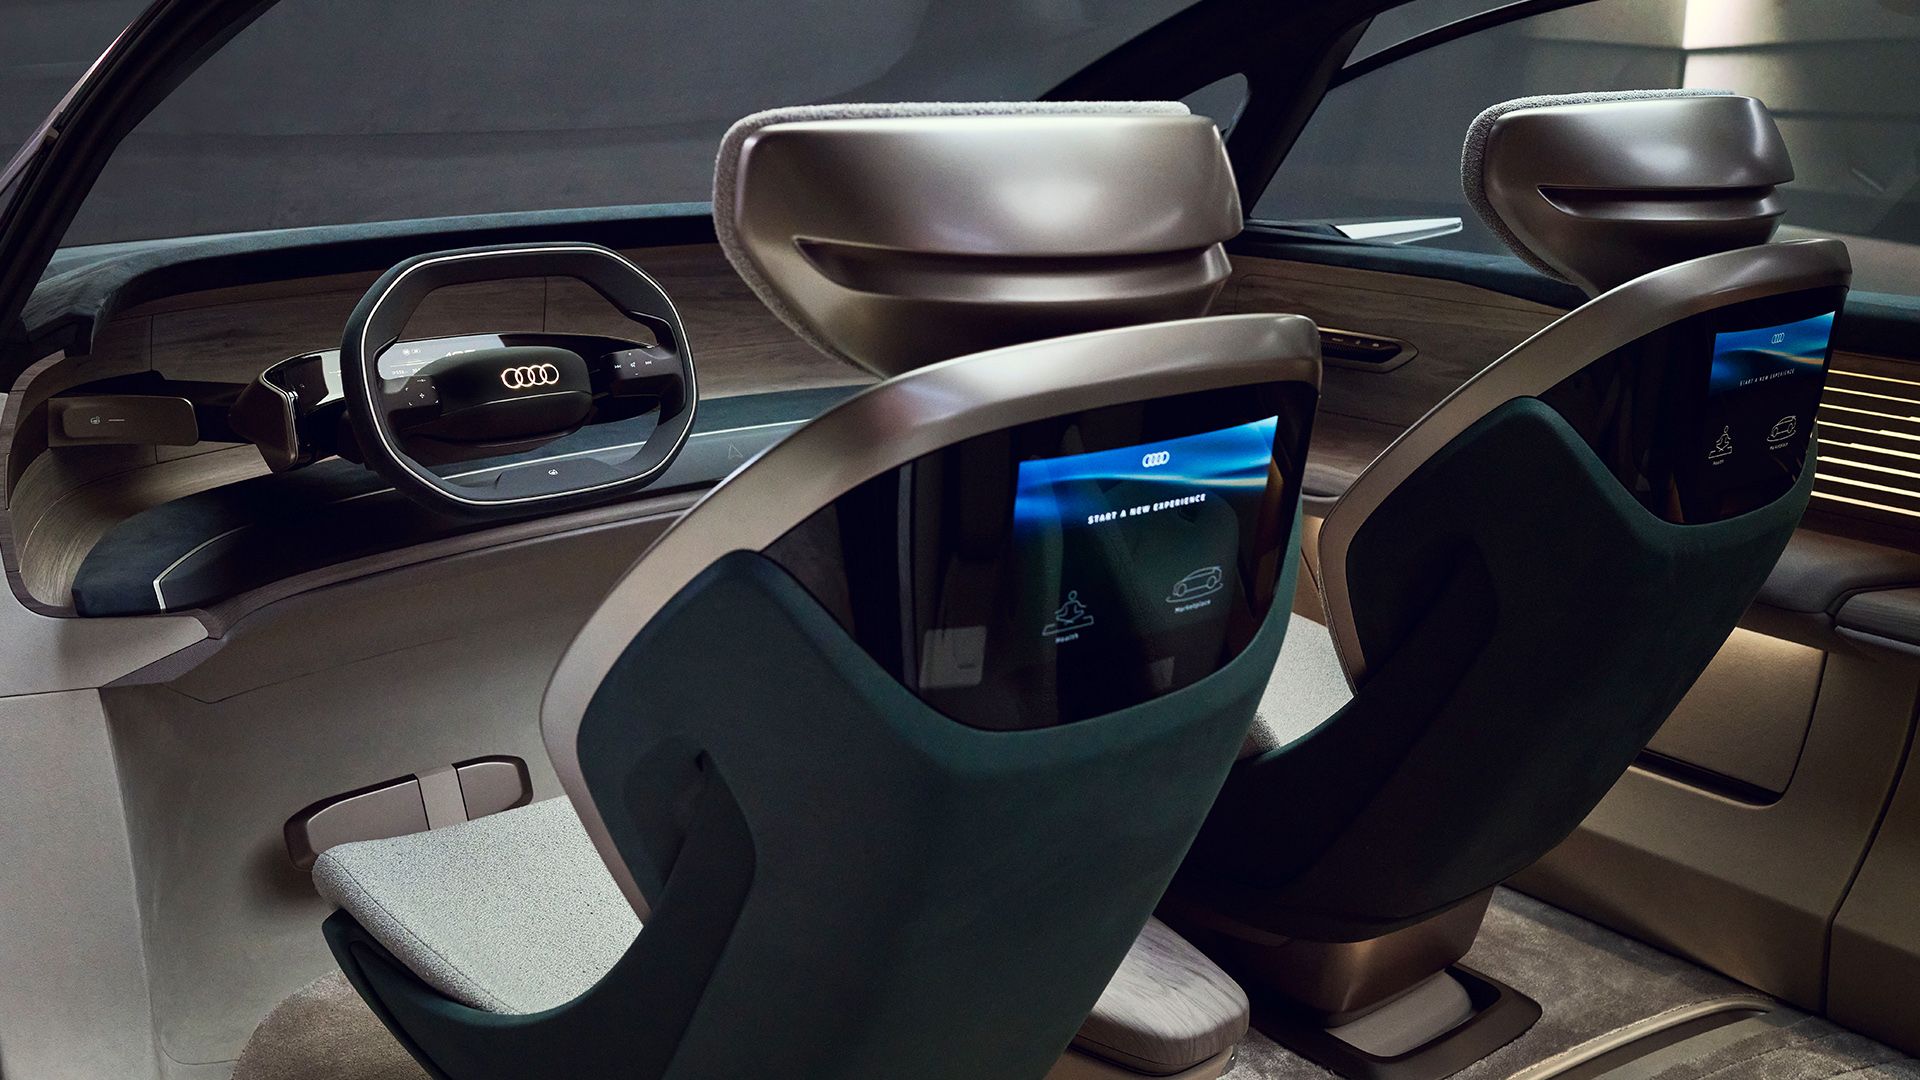 Seats in the interior of the Audi urbansphere concept.